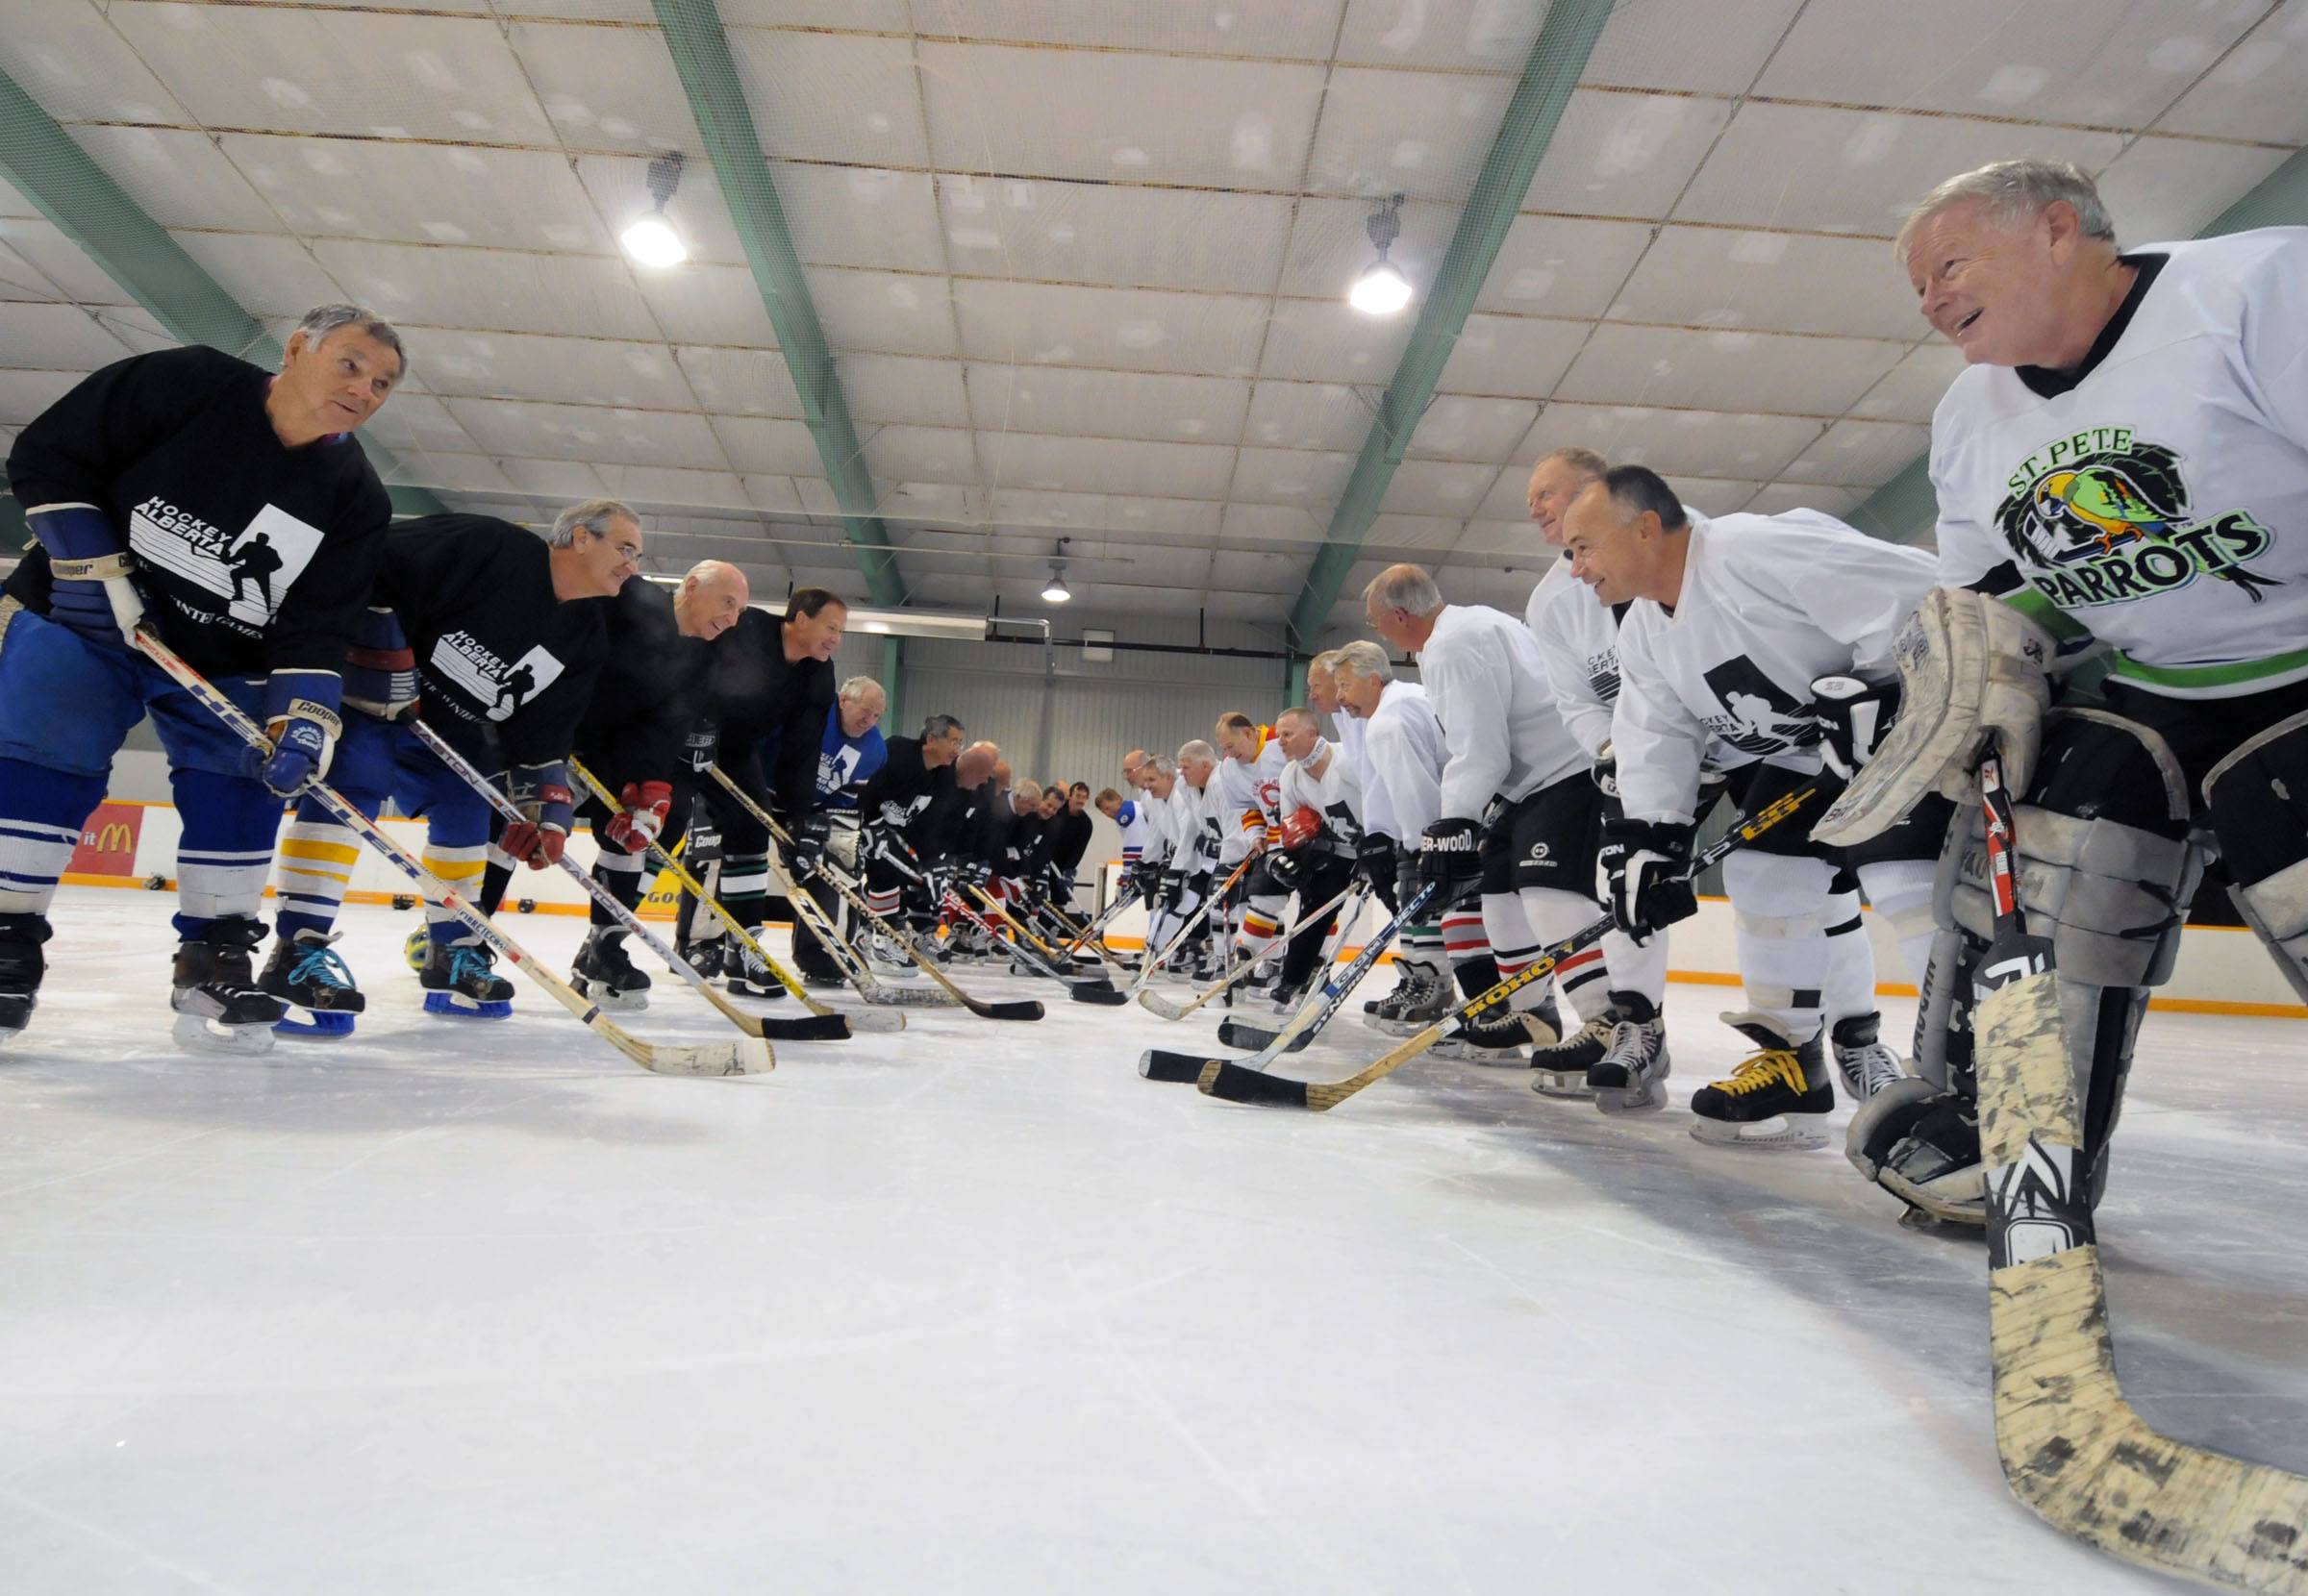 STILL YOUNG- Members of the Red Deer Masters Hockey Association (RDMHA) include men aged 55 and over who still have what it takes to play Canada’s favourite game.